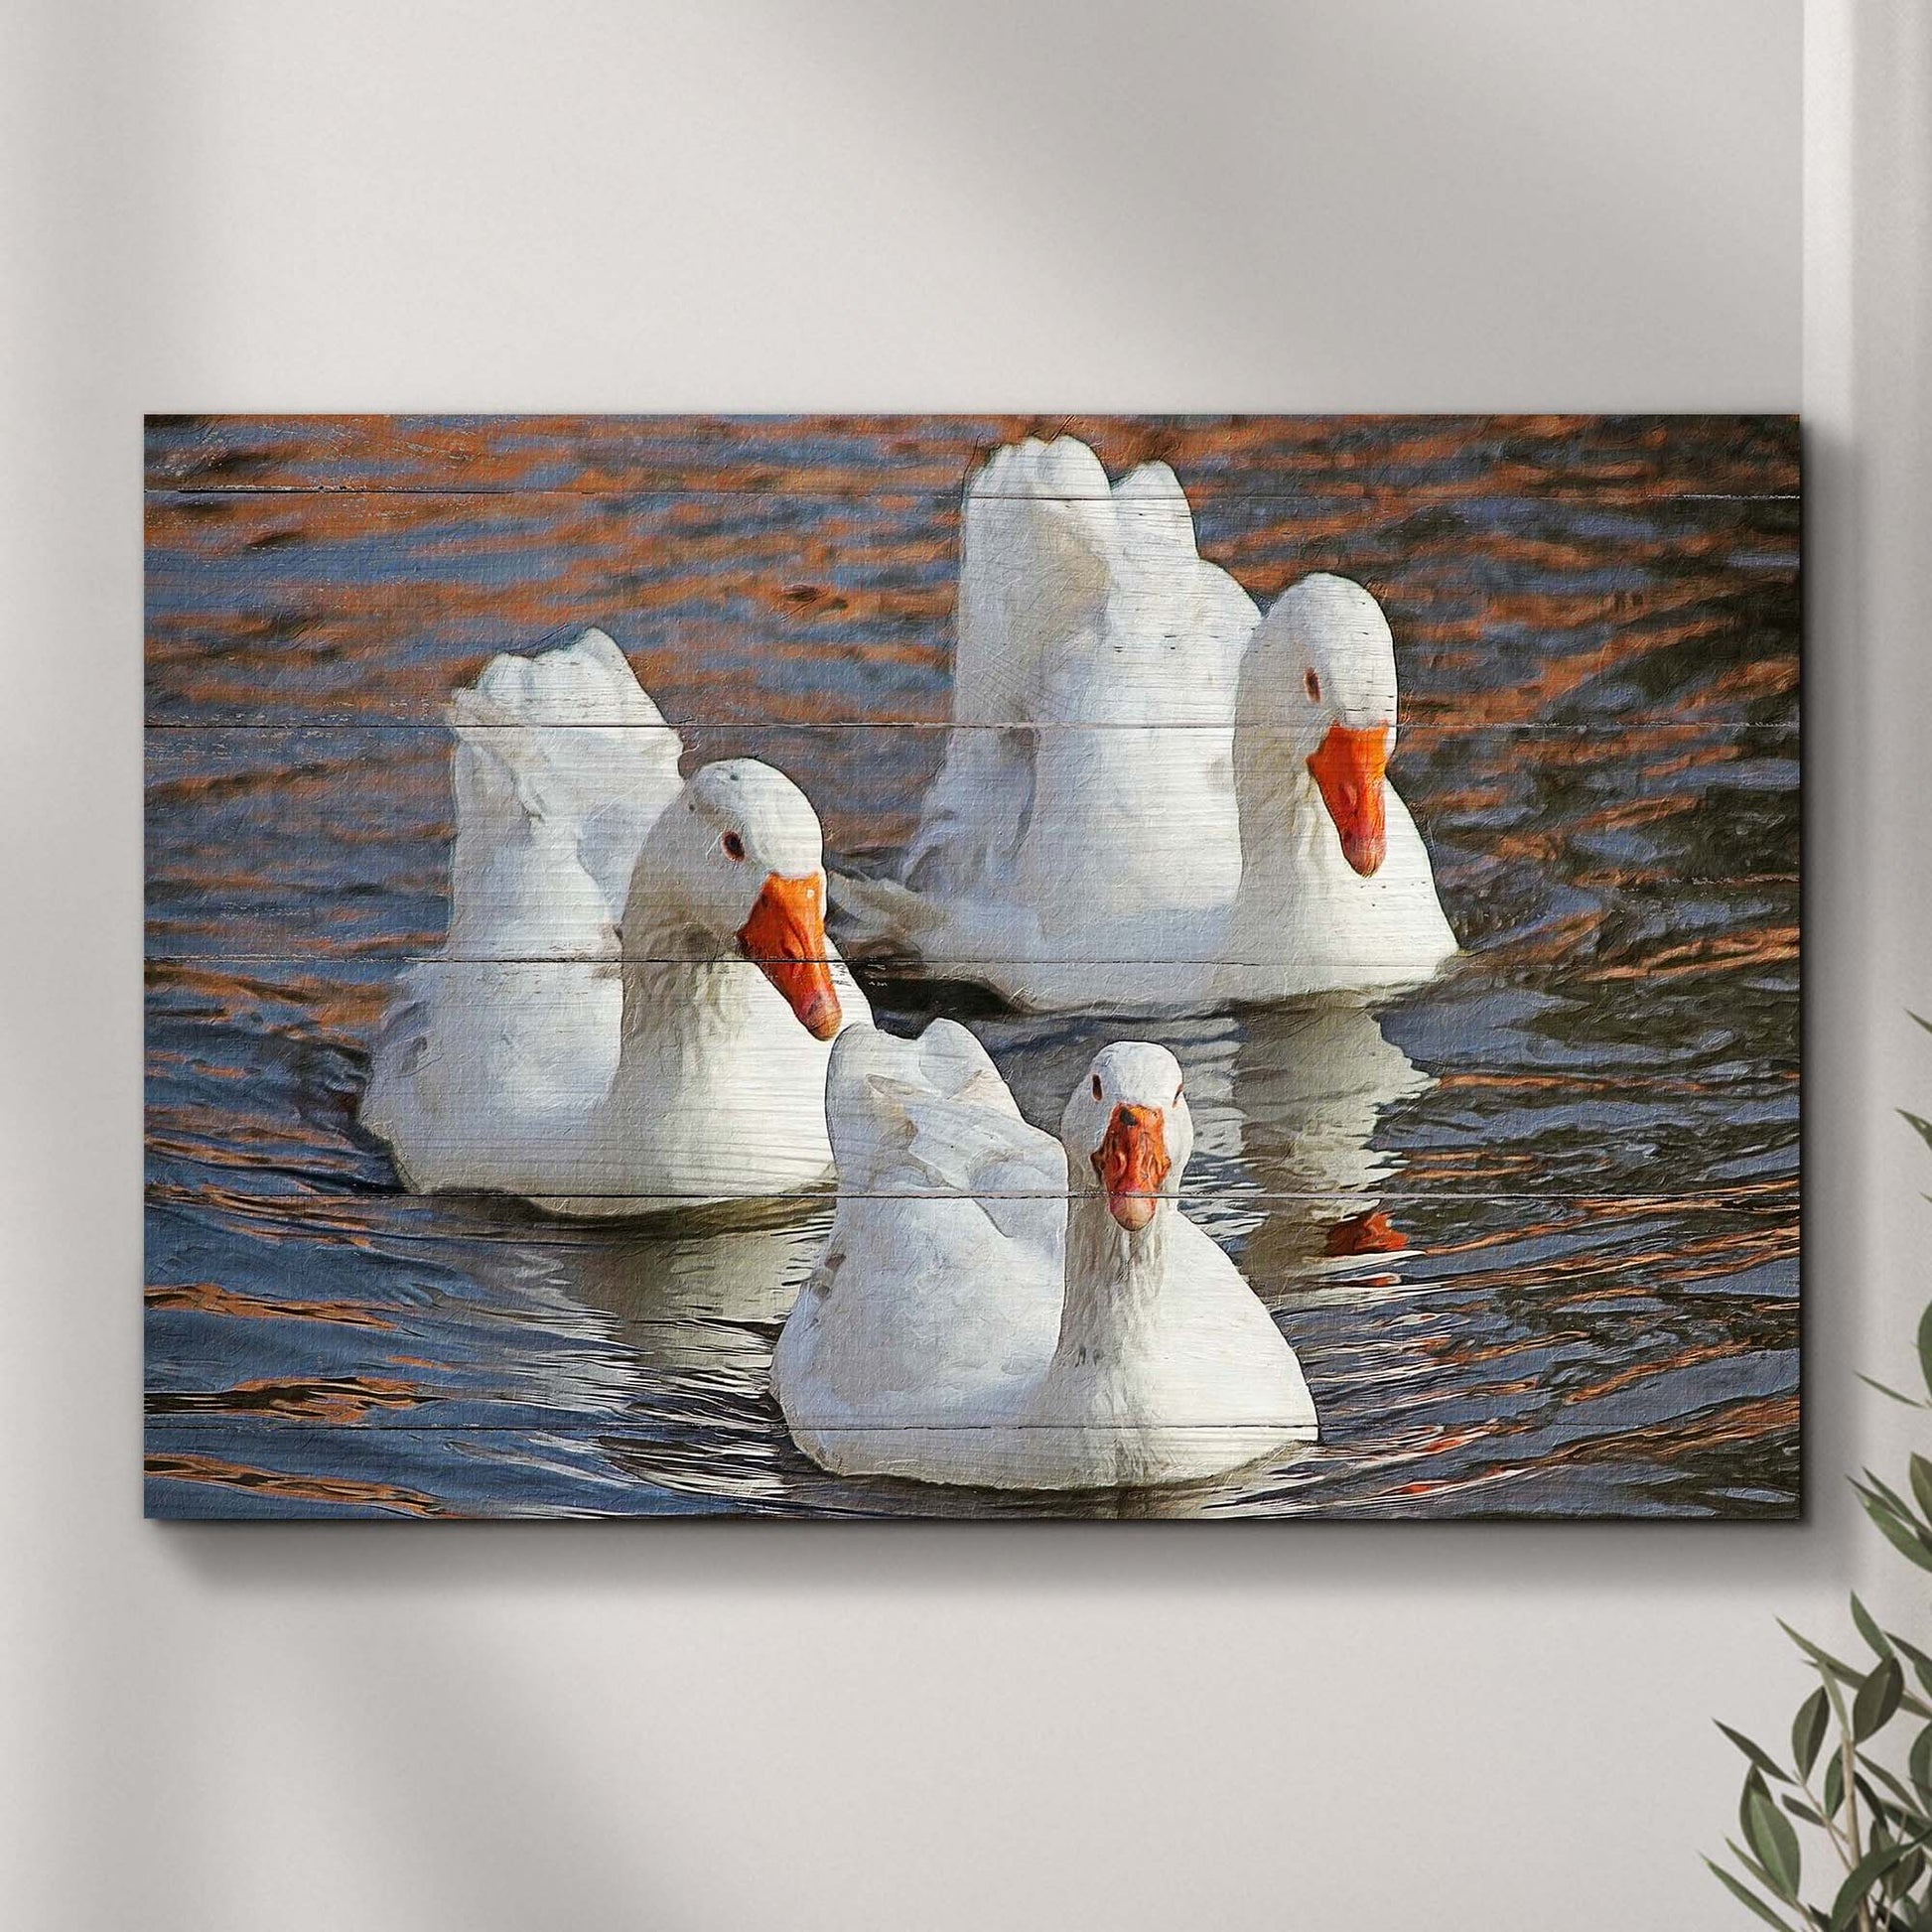 Three White Geese Canvas Wall Art - Image by Tailored Canvases